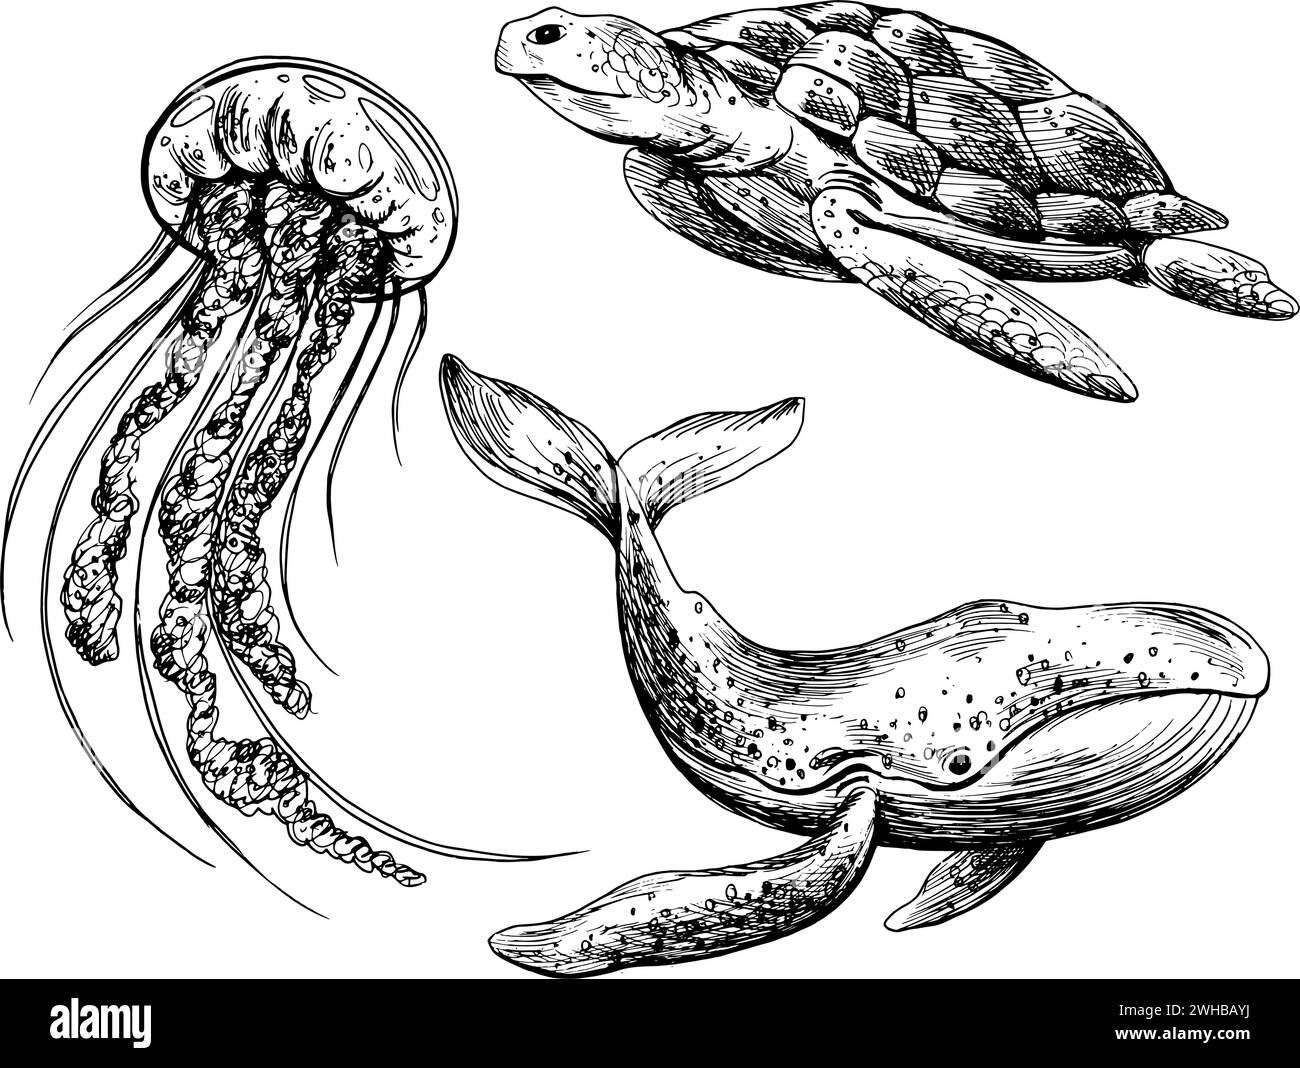 Underwater world clipart with sea animals whale, turtle, jellyfish. Graphic illustration hand drawn in black ink. A set of isolated elements EPS Stock Vector